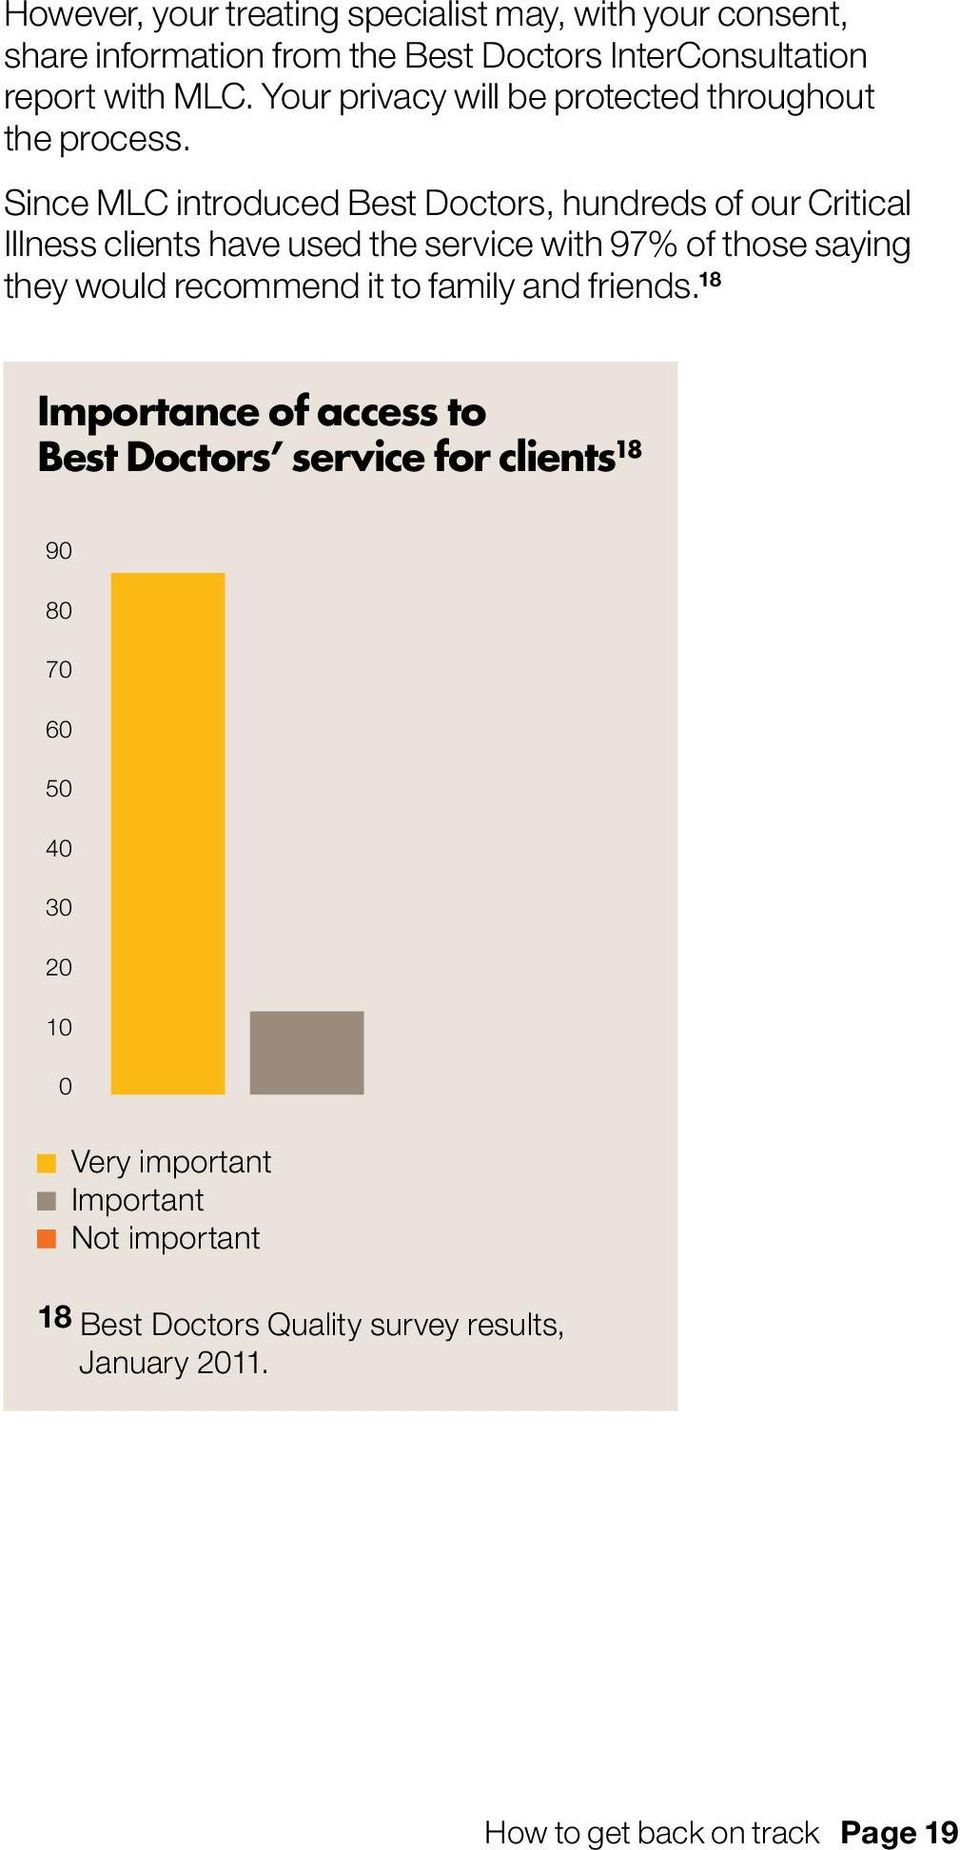 Since MLC introduced Best Doctors, hundreds of our Critical Illness clients have used the service with 97% of those saying they would recommend